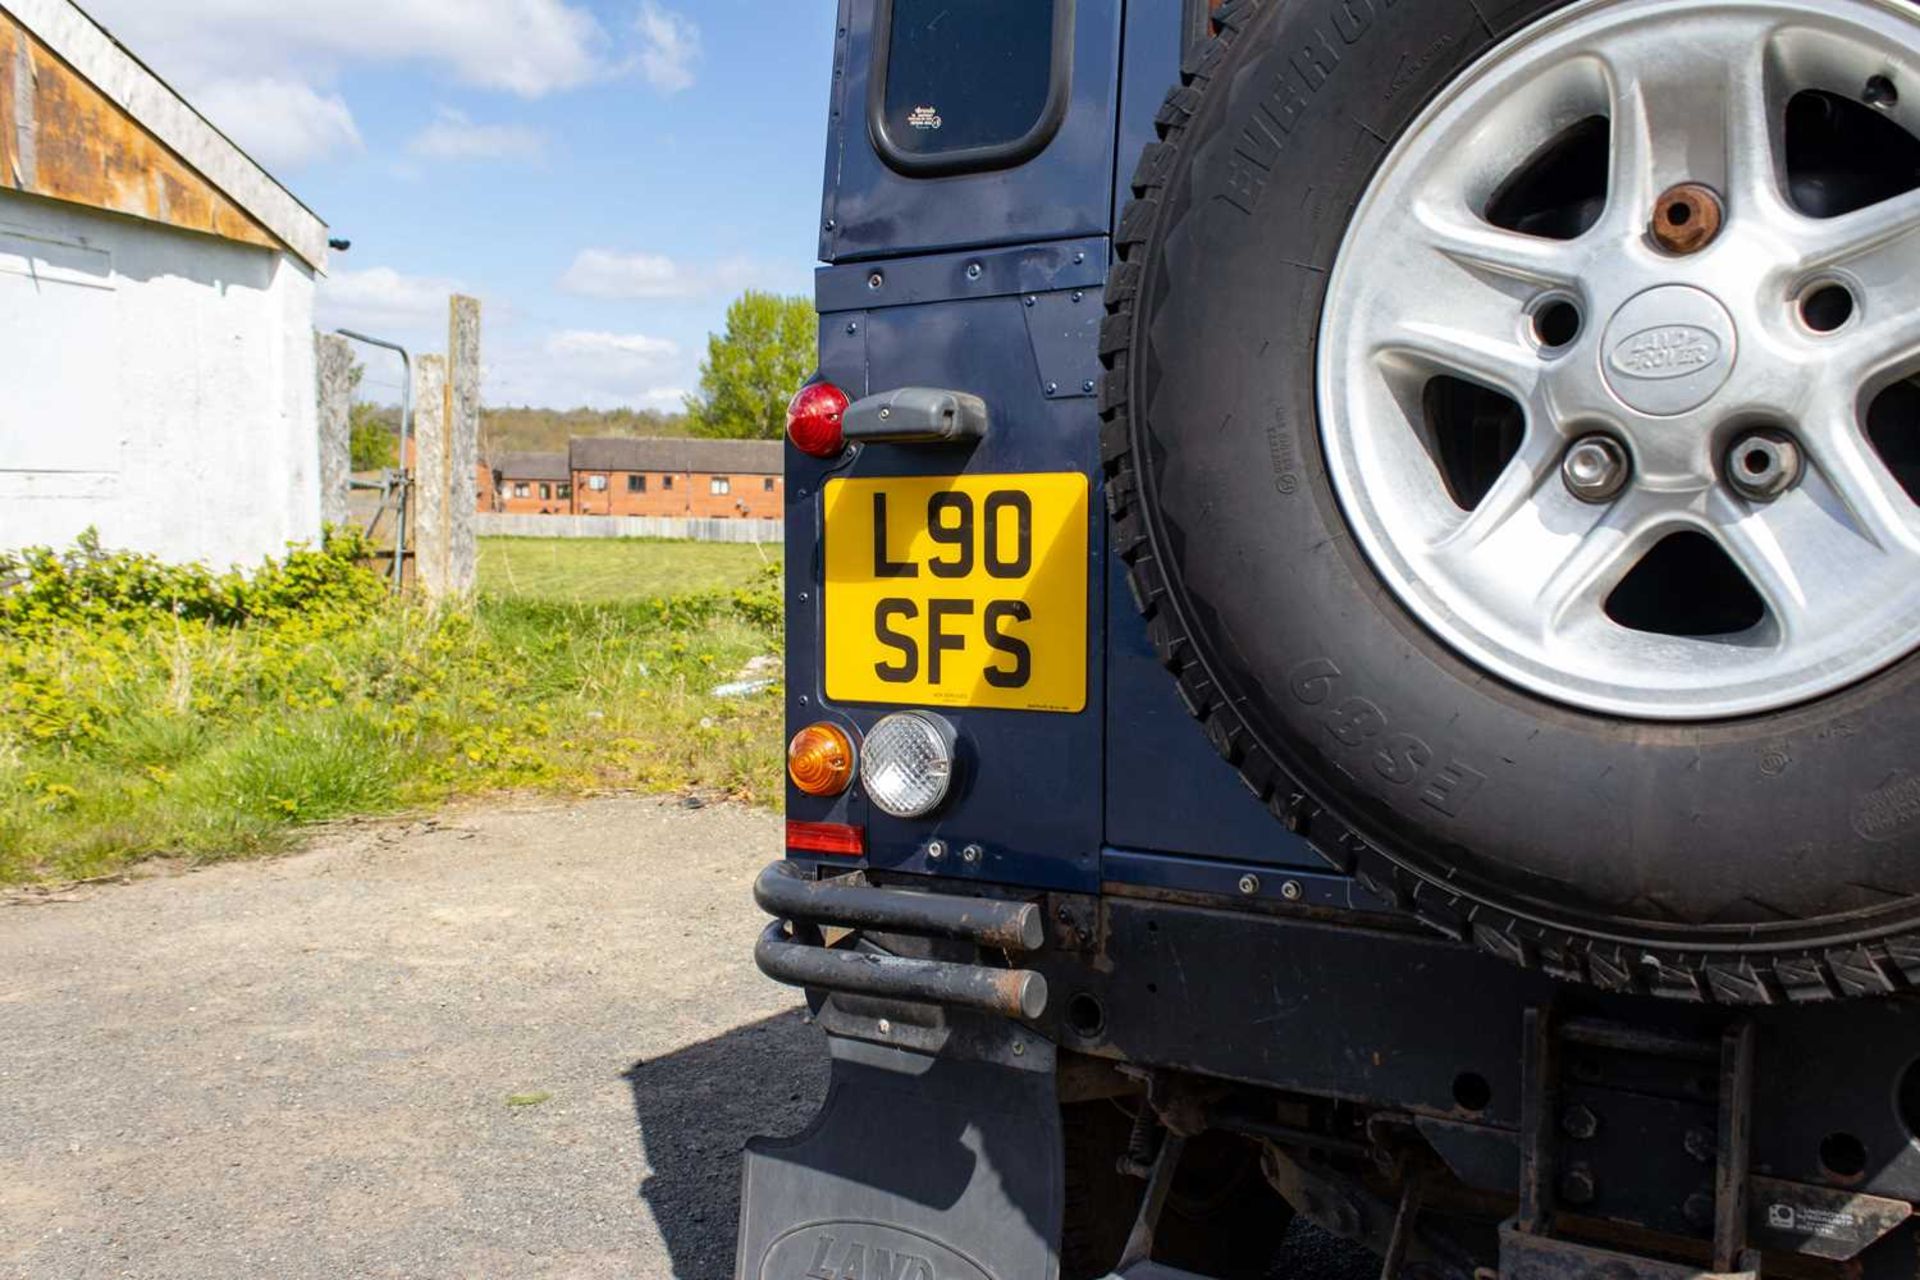 2007 Land Rover Defender 90 County  Powered by the 2.4-litre TDCi unit and features numerous tastefu - Image 42 of 76